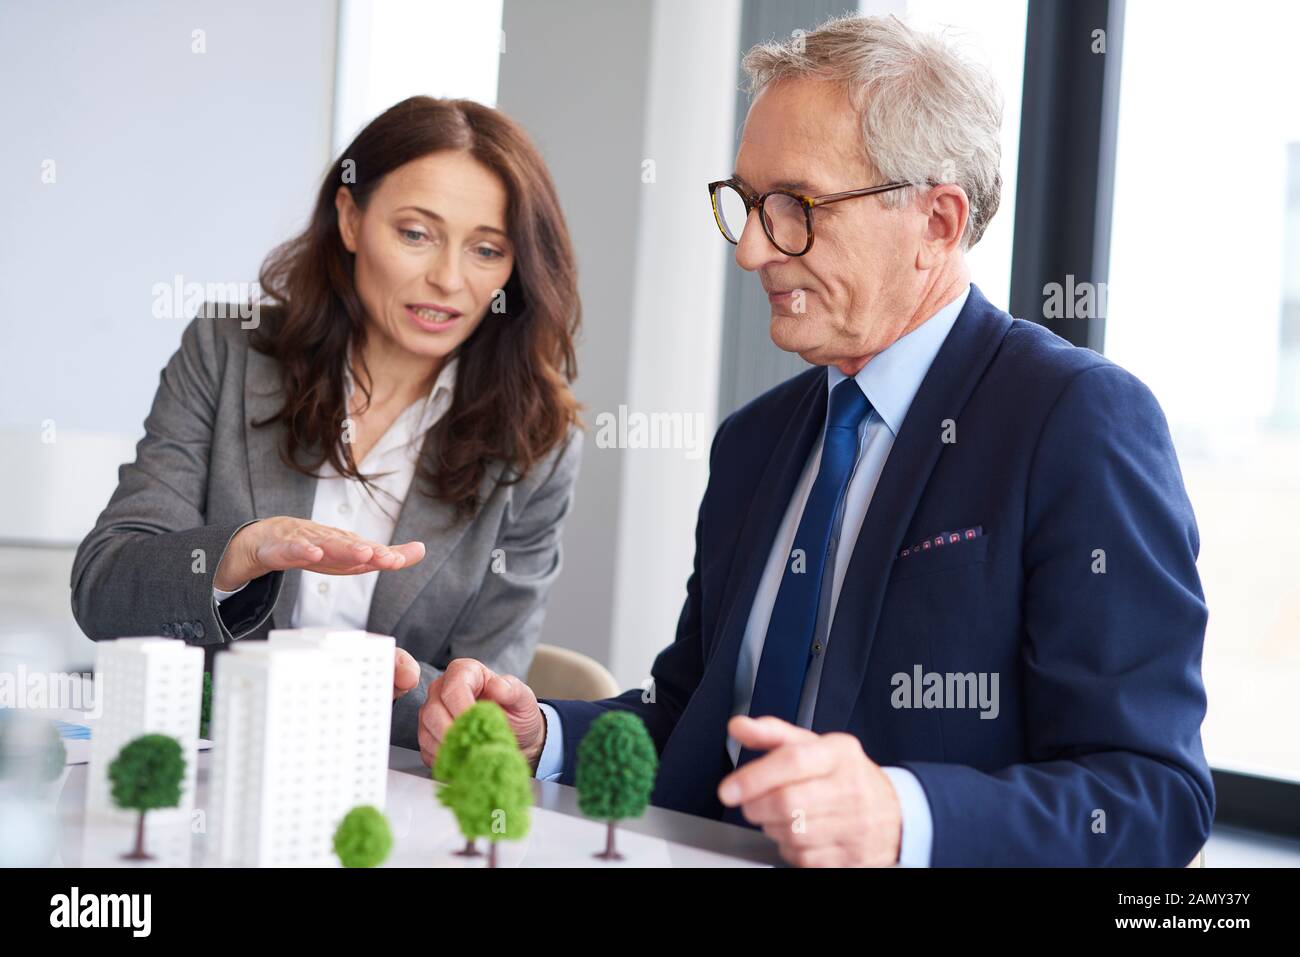 Business couple over architectural model Stock Photo